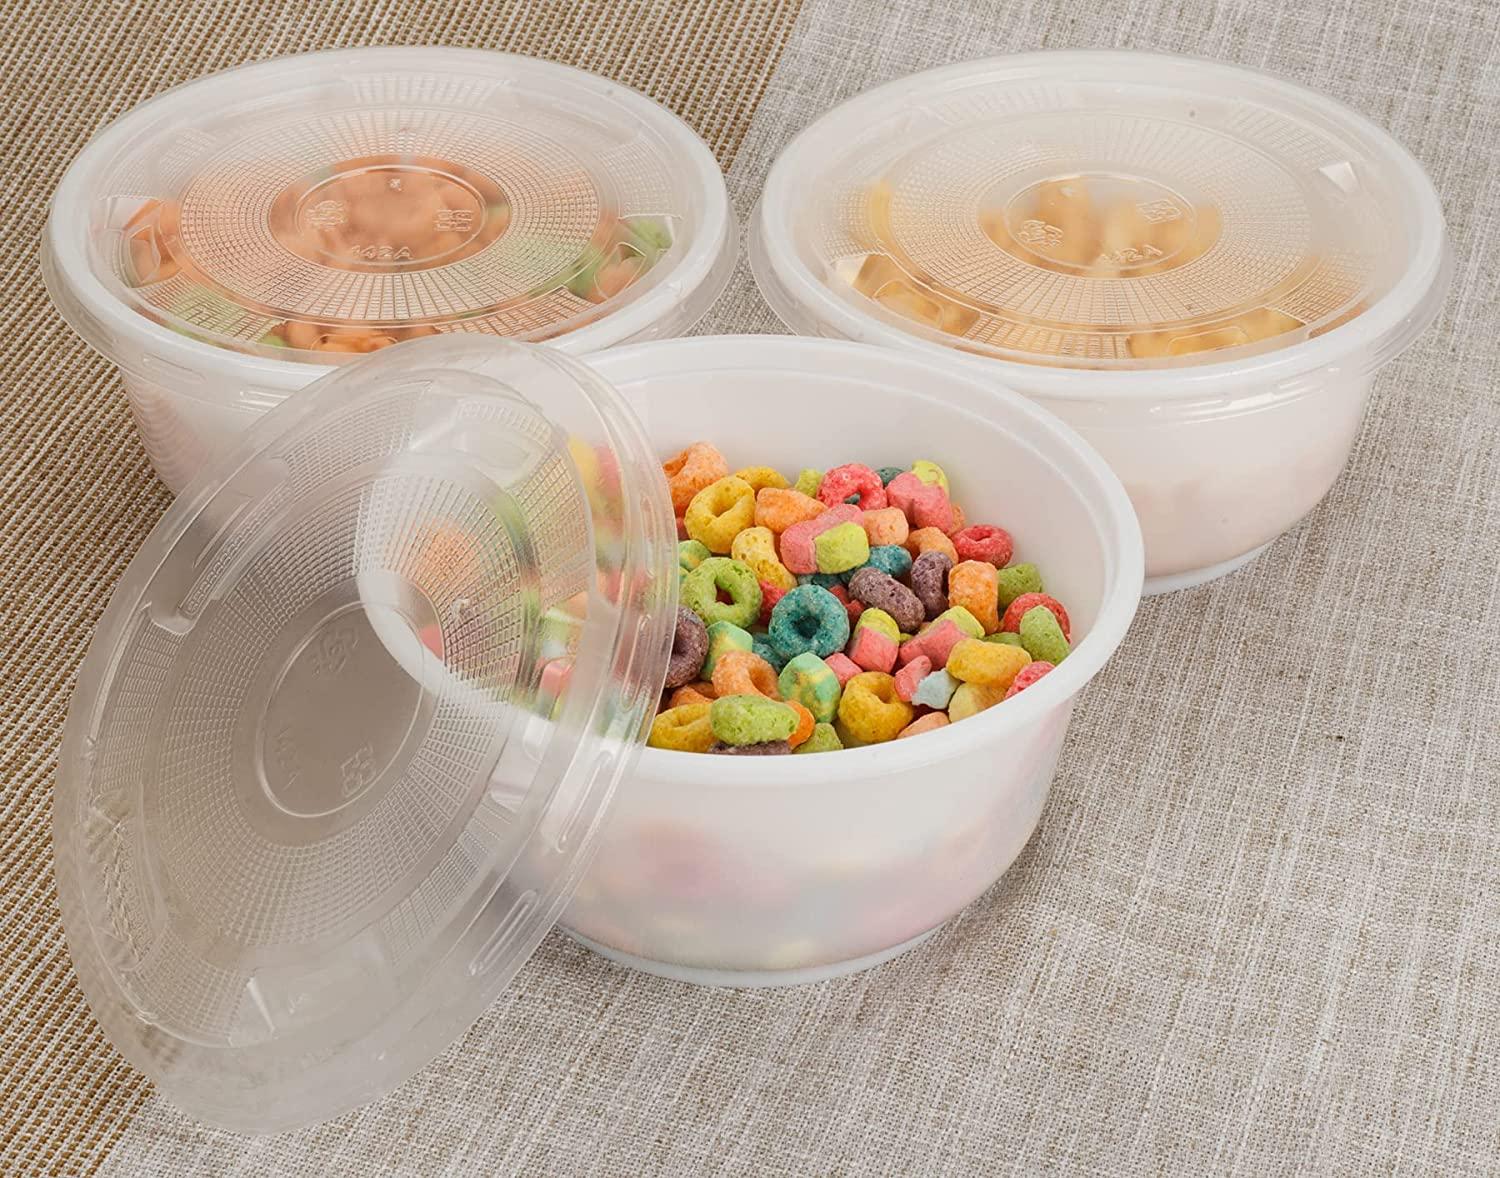 28 OZ Plastic Food Containers with Lids Microwavable Meal Prep